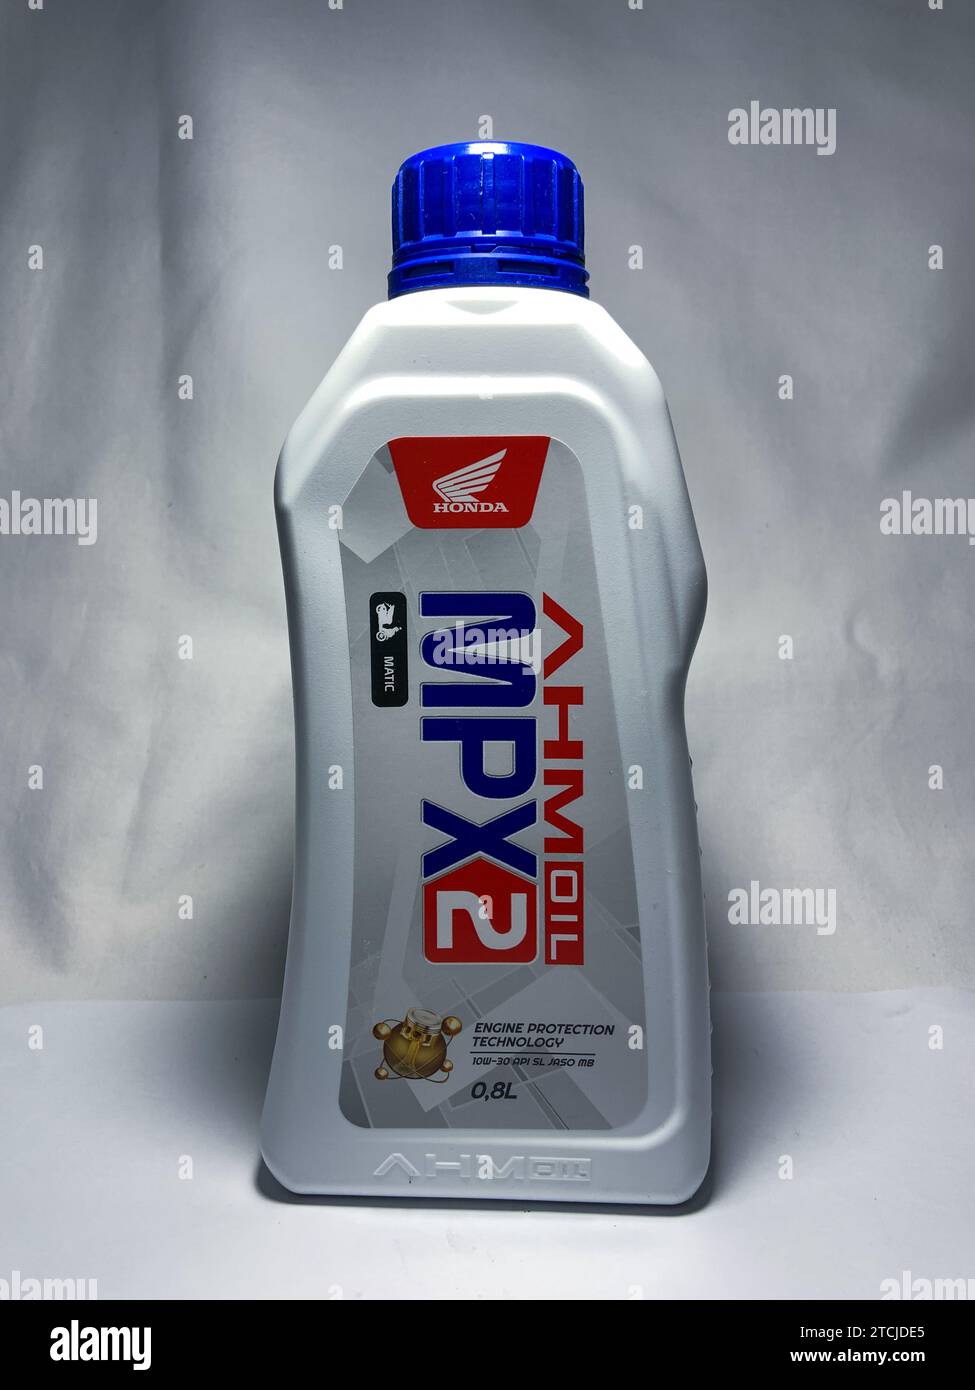 Surakarta, Indonesia - November 20, 2023 : MPX 2 AHM matic motor oil, engine protection technology 10W-30 SL JASO MB for matic motorcycle 800ml. Plast Stock Photo